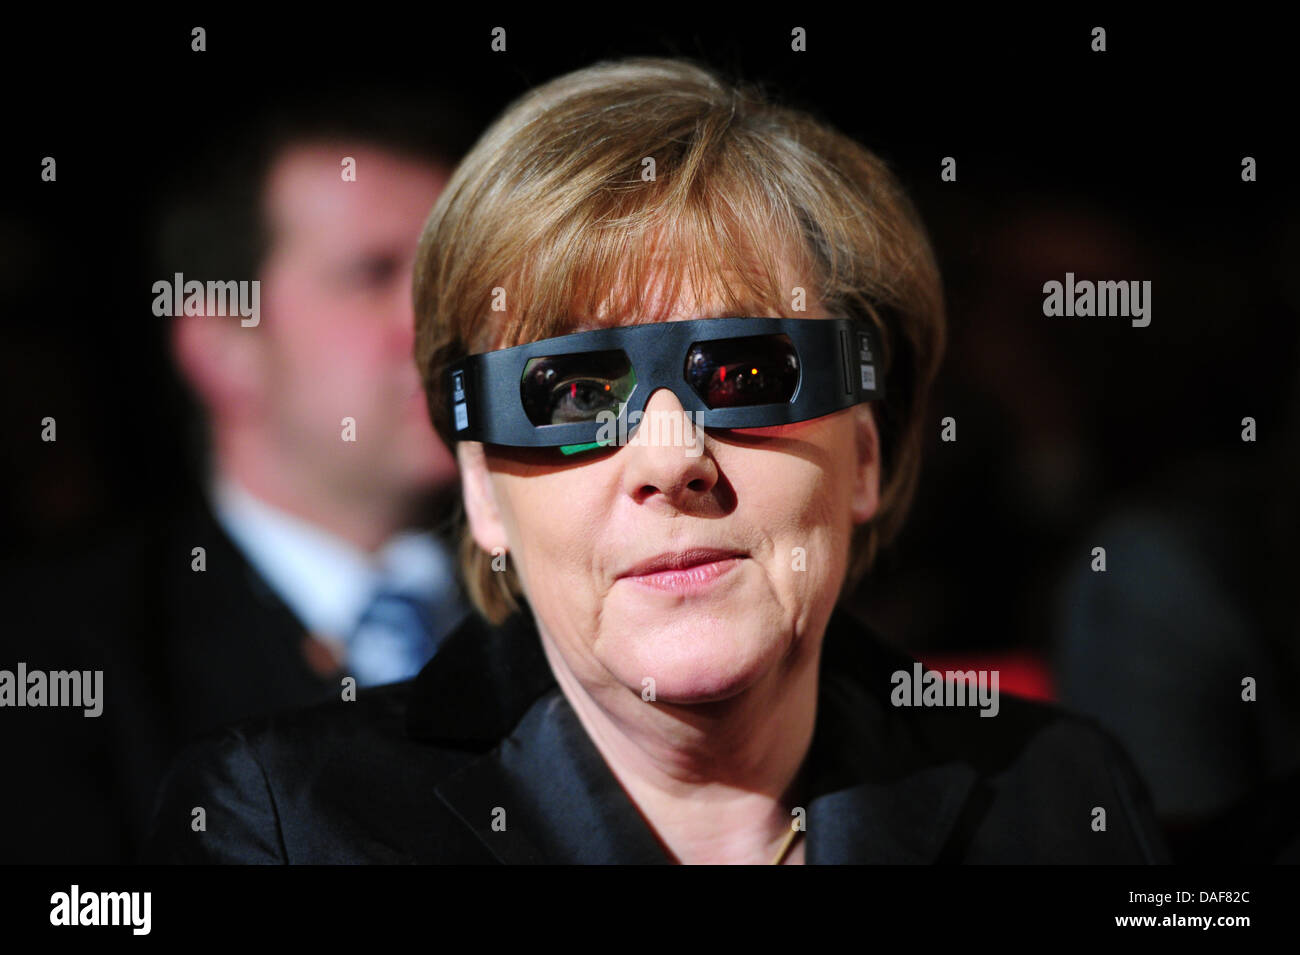 German chancellor Angela Merkel seen wearing 3D glasses during the premiere  of the film 'Pina' at the 61st Berlin International Film Festival in  Berlin, Germany, 13 February 2011. The film is running